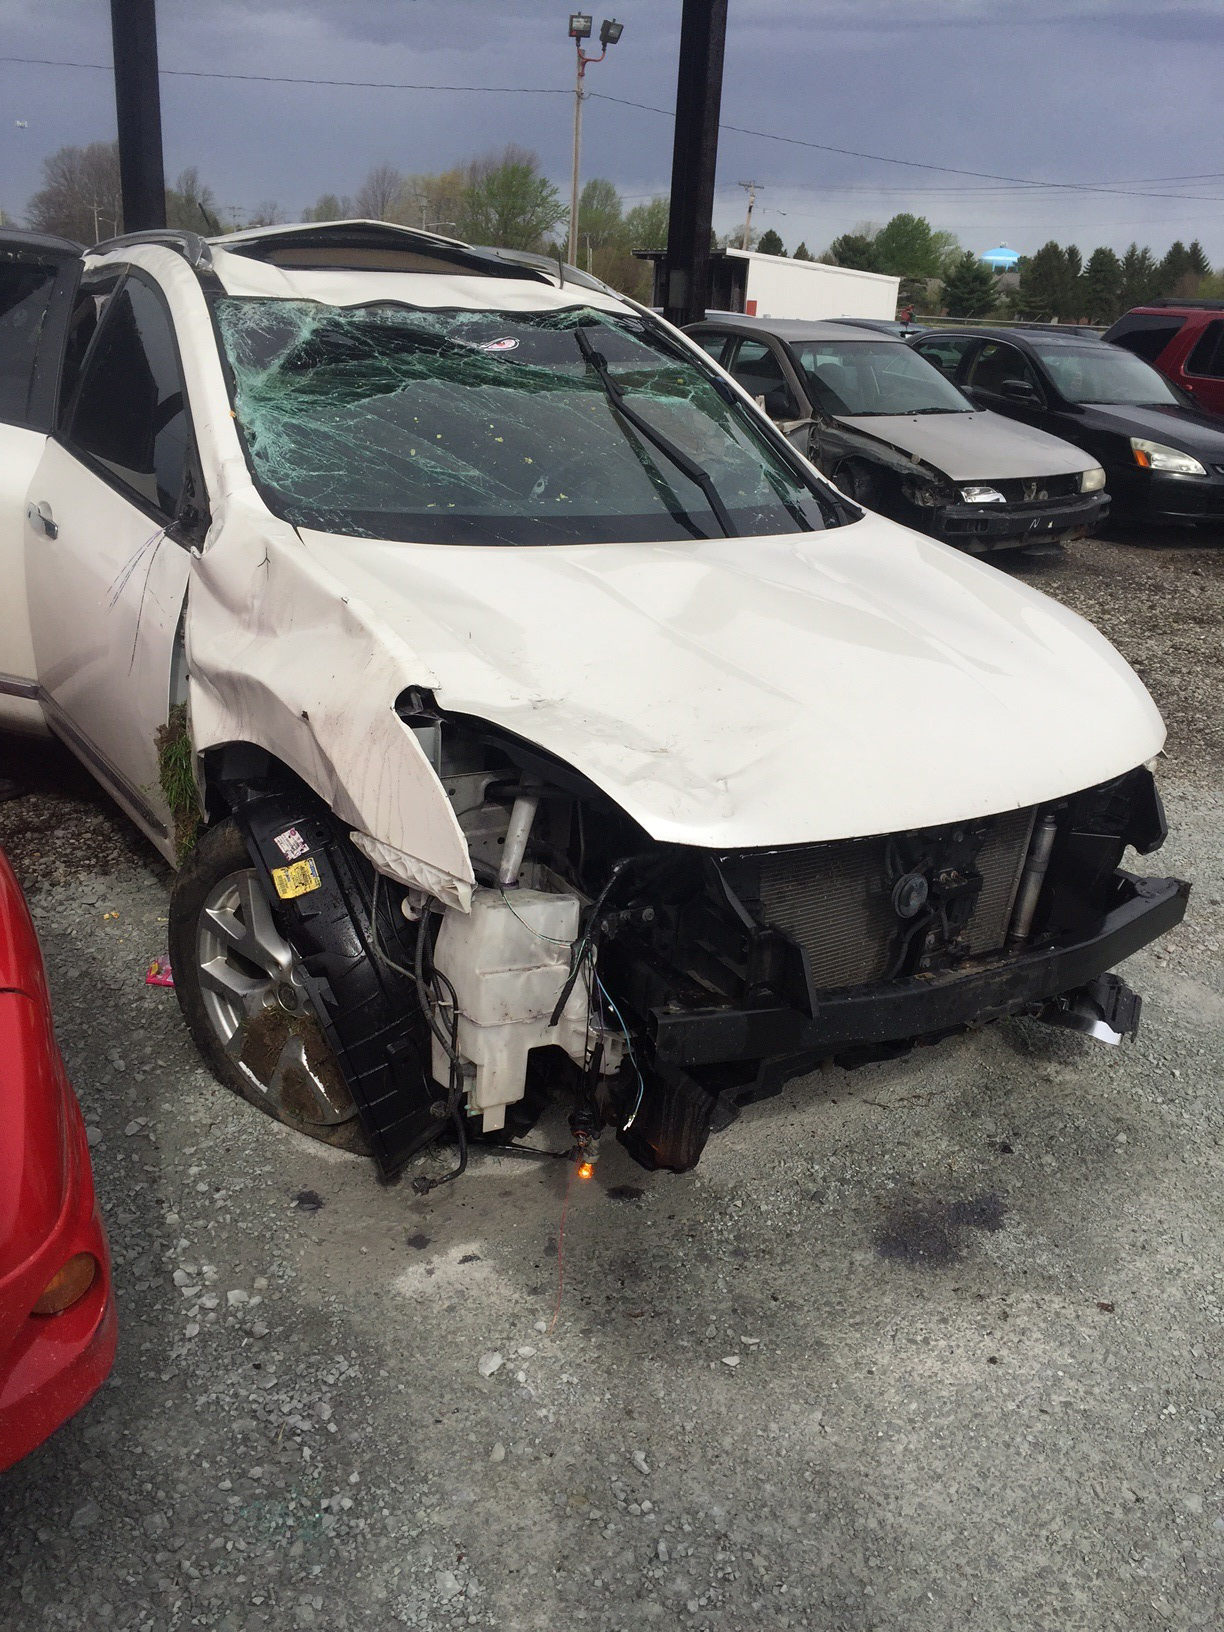 PHOTO: The totaled car belonging to Ashley McCollum-Lakey and Jeff Lakey is pictured after their April 2017 car accident.